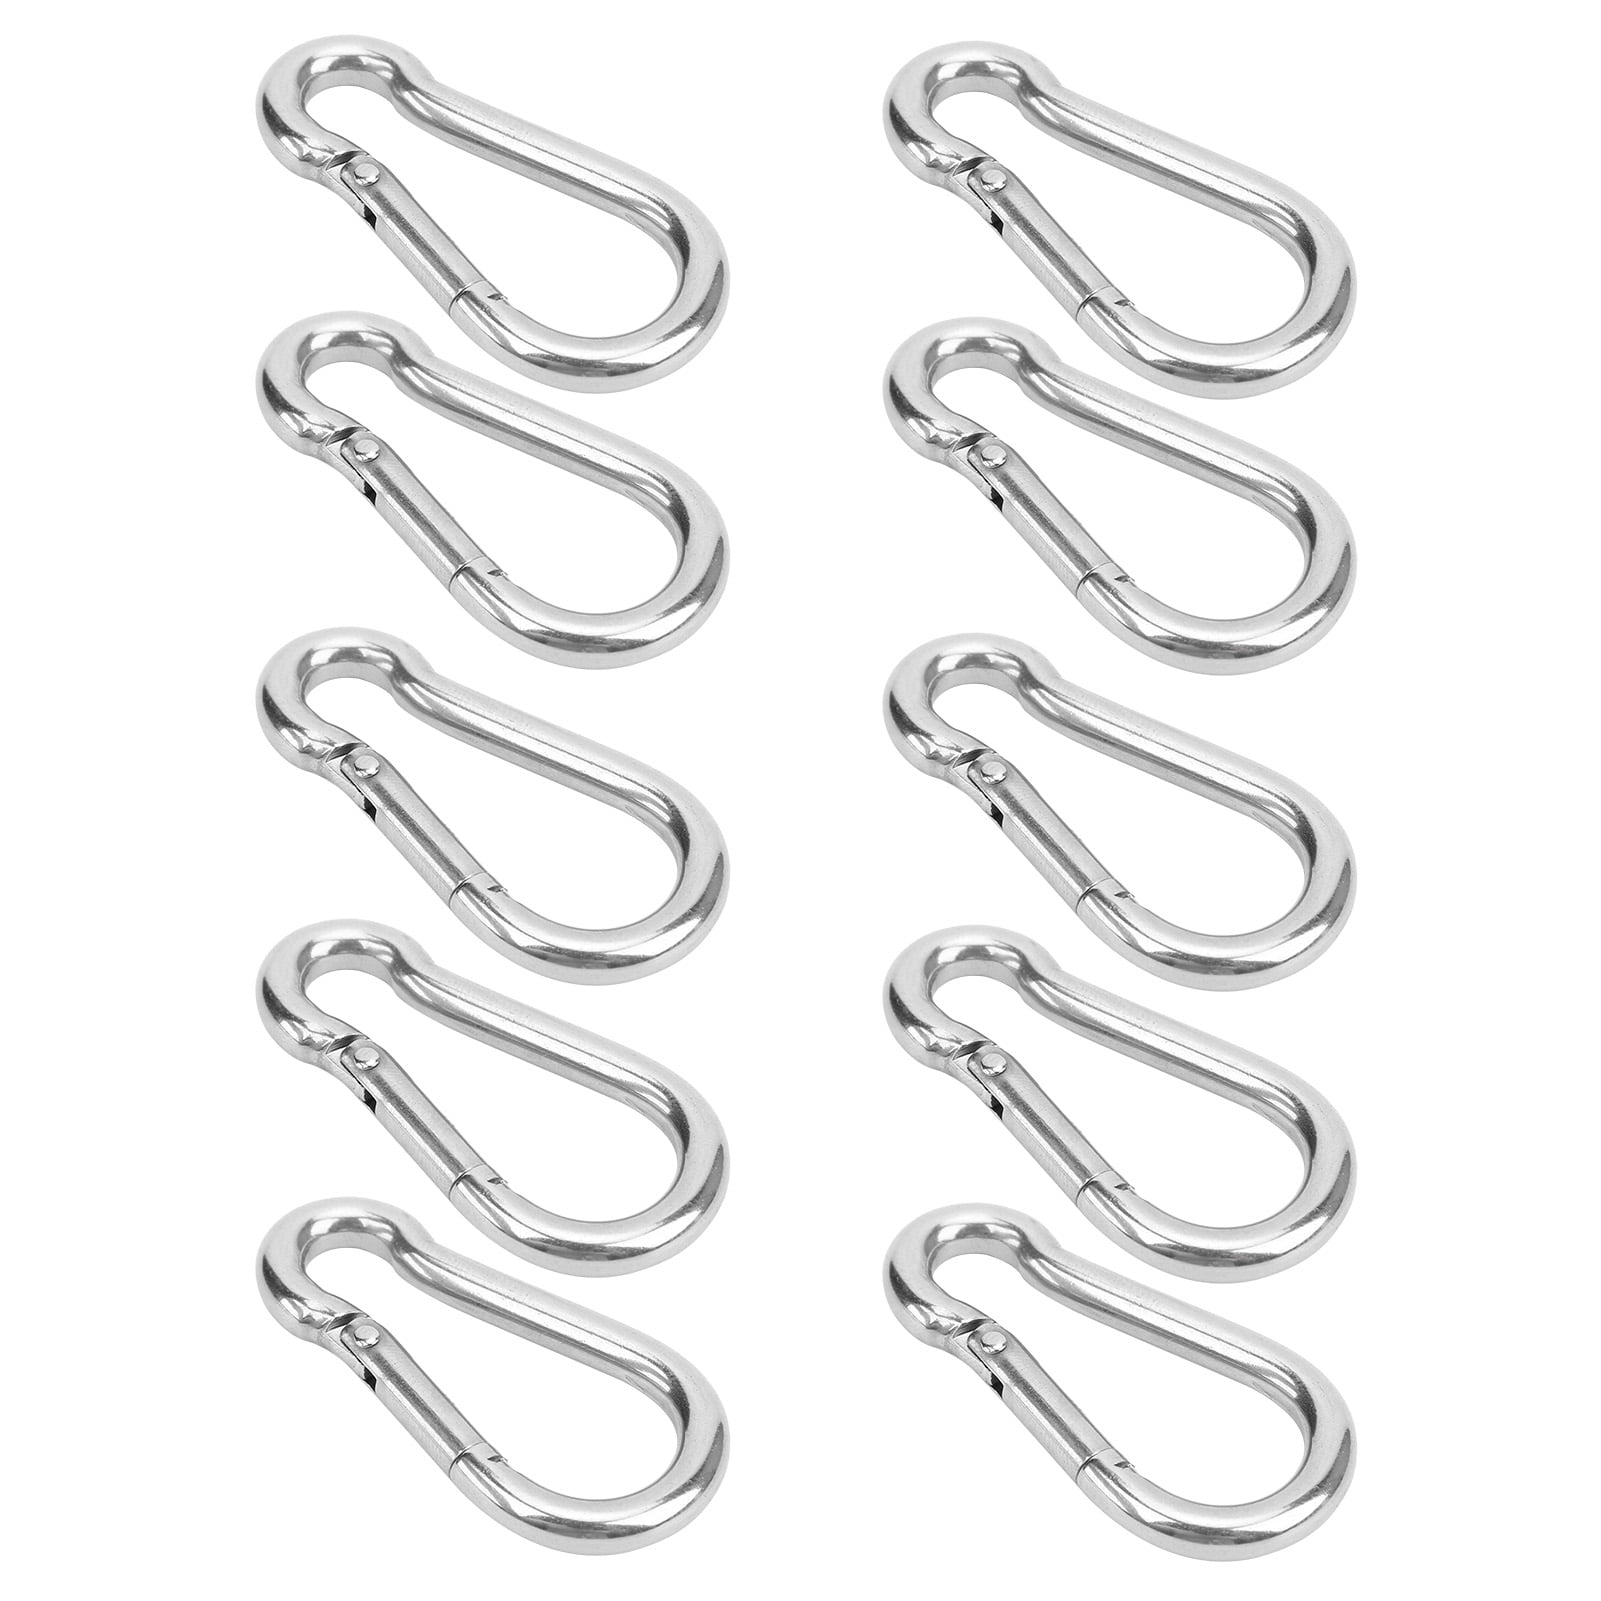 Stainless Steel Silver Spring Hook Hanging Buckle Snap Carabiner Climbing Safety 